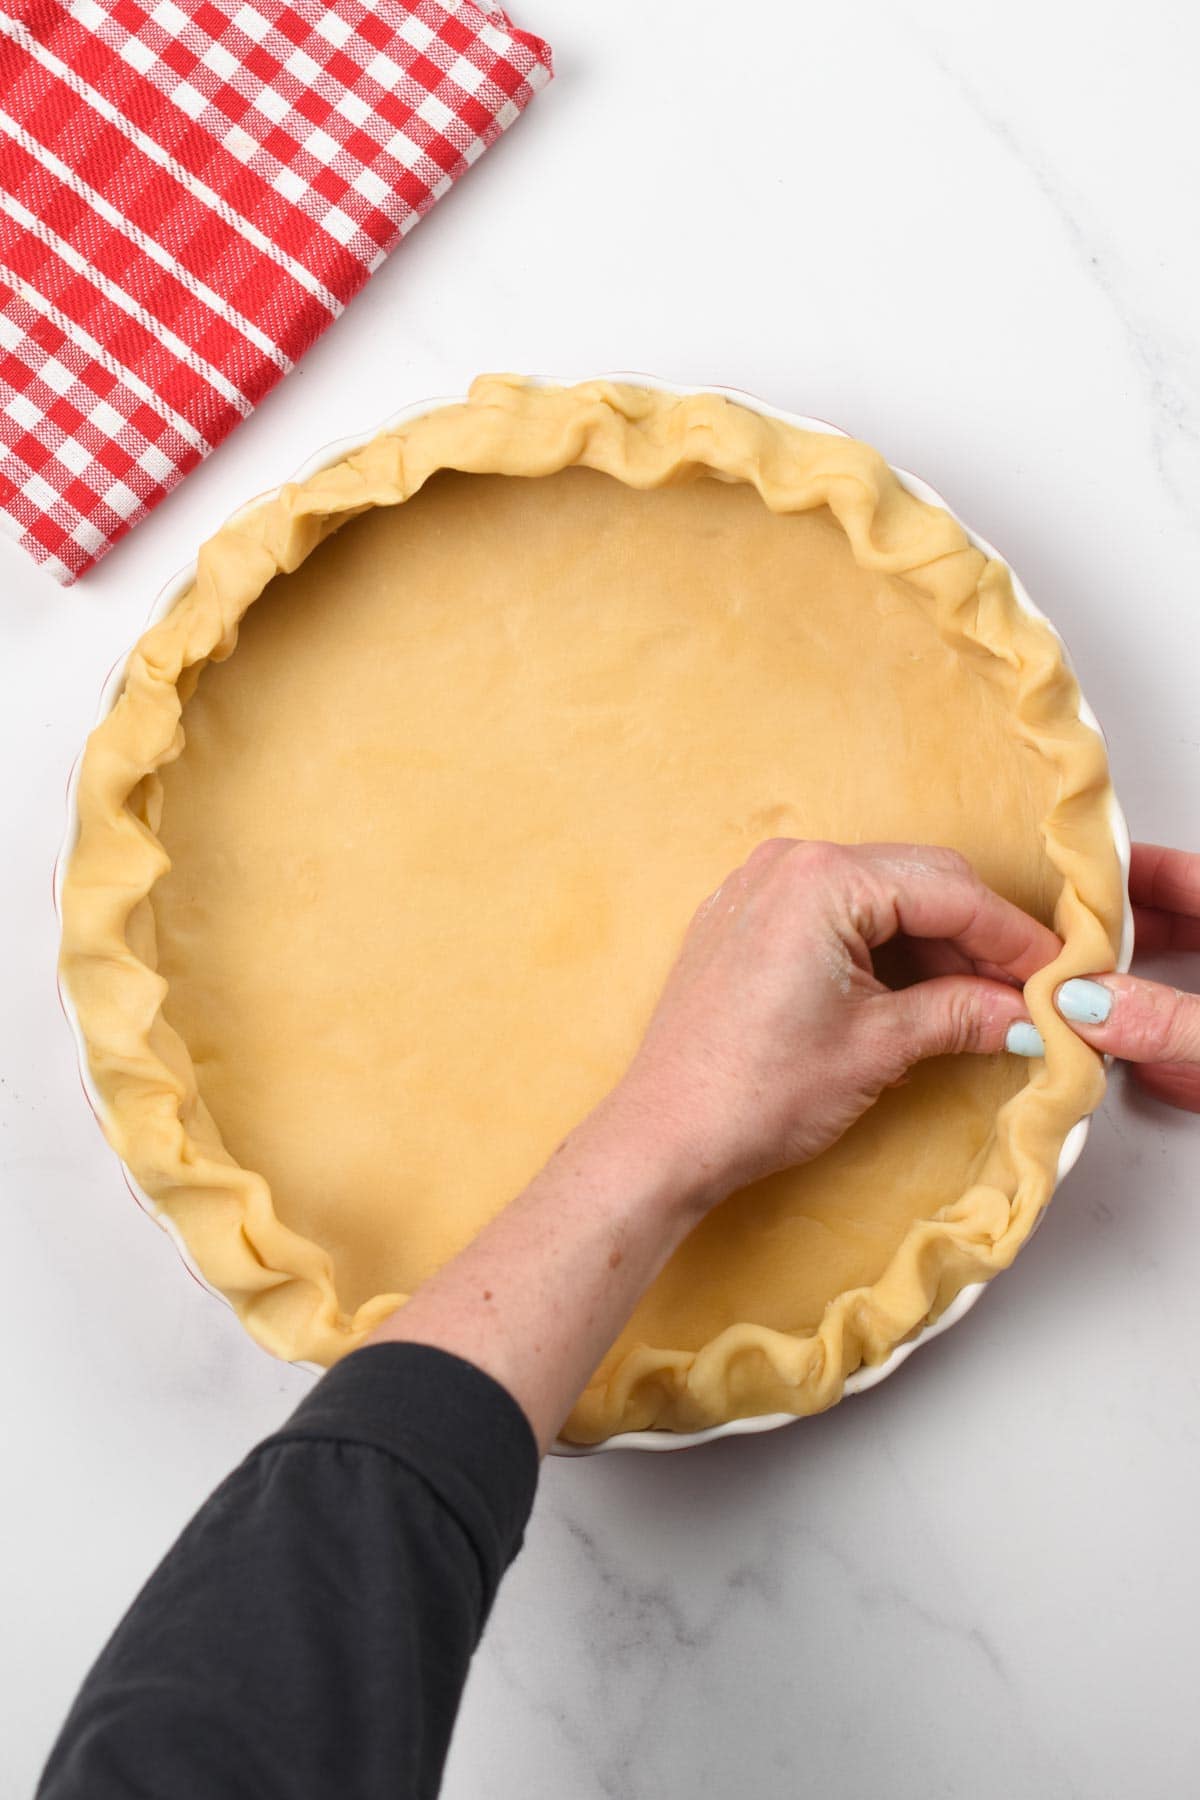 Pressing the 3-ingredient Pie Crust into the pan manually.